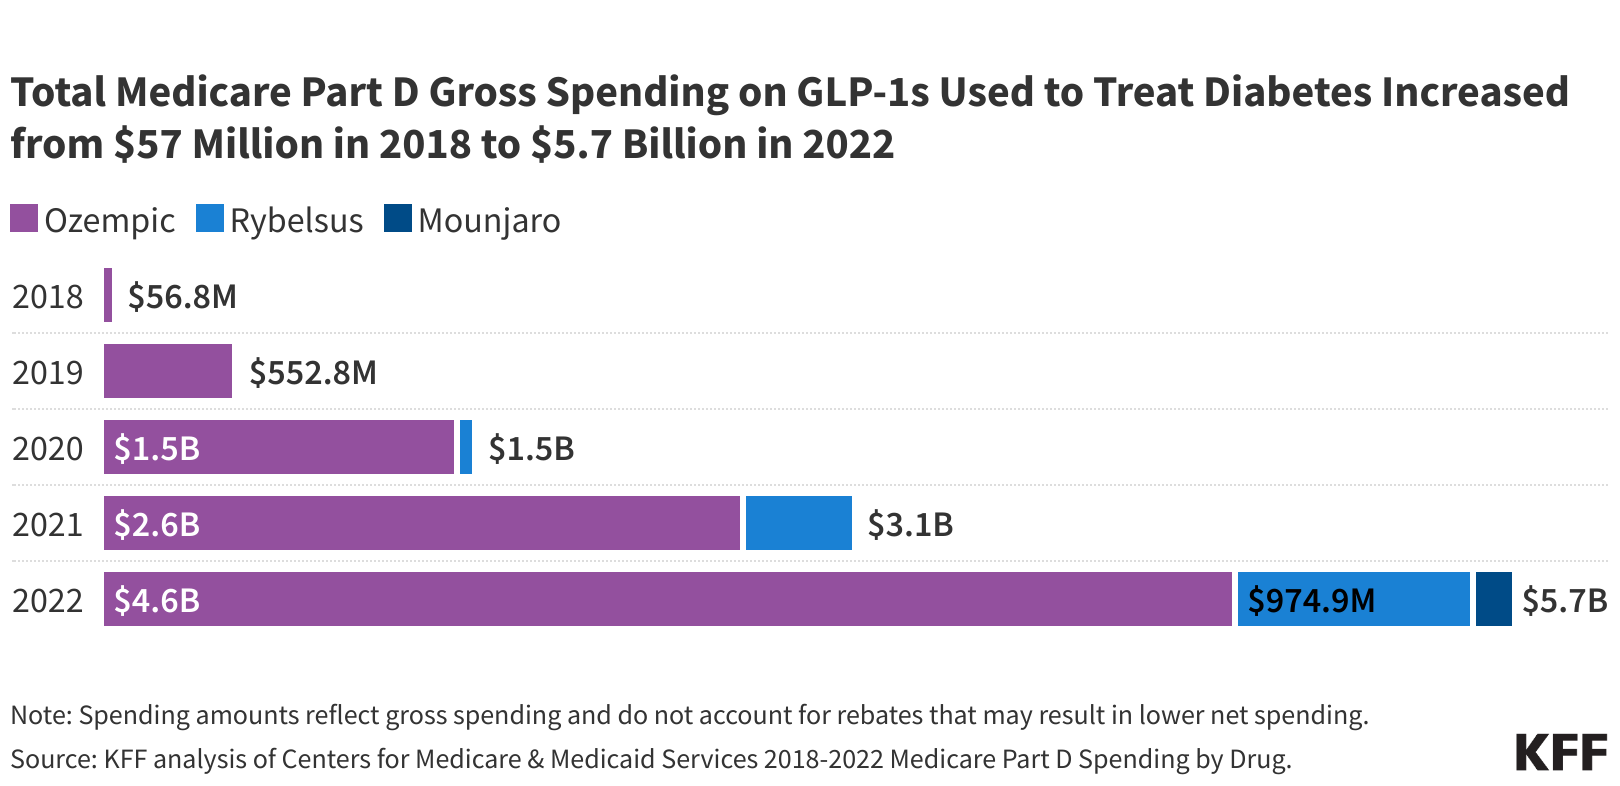 Gross Medicare Spending on Ozempic and Other GLP-1s Is Already Skyrocketing  – Even Though Medicare Cannot Cover The Drugs for Weight Loss